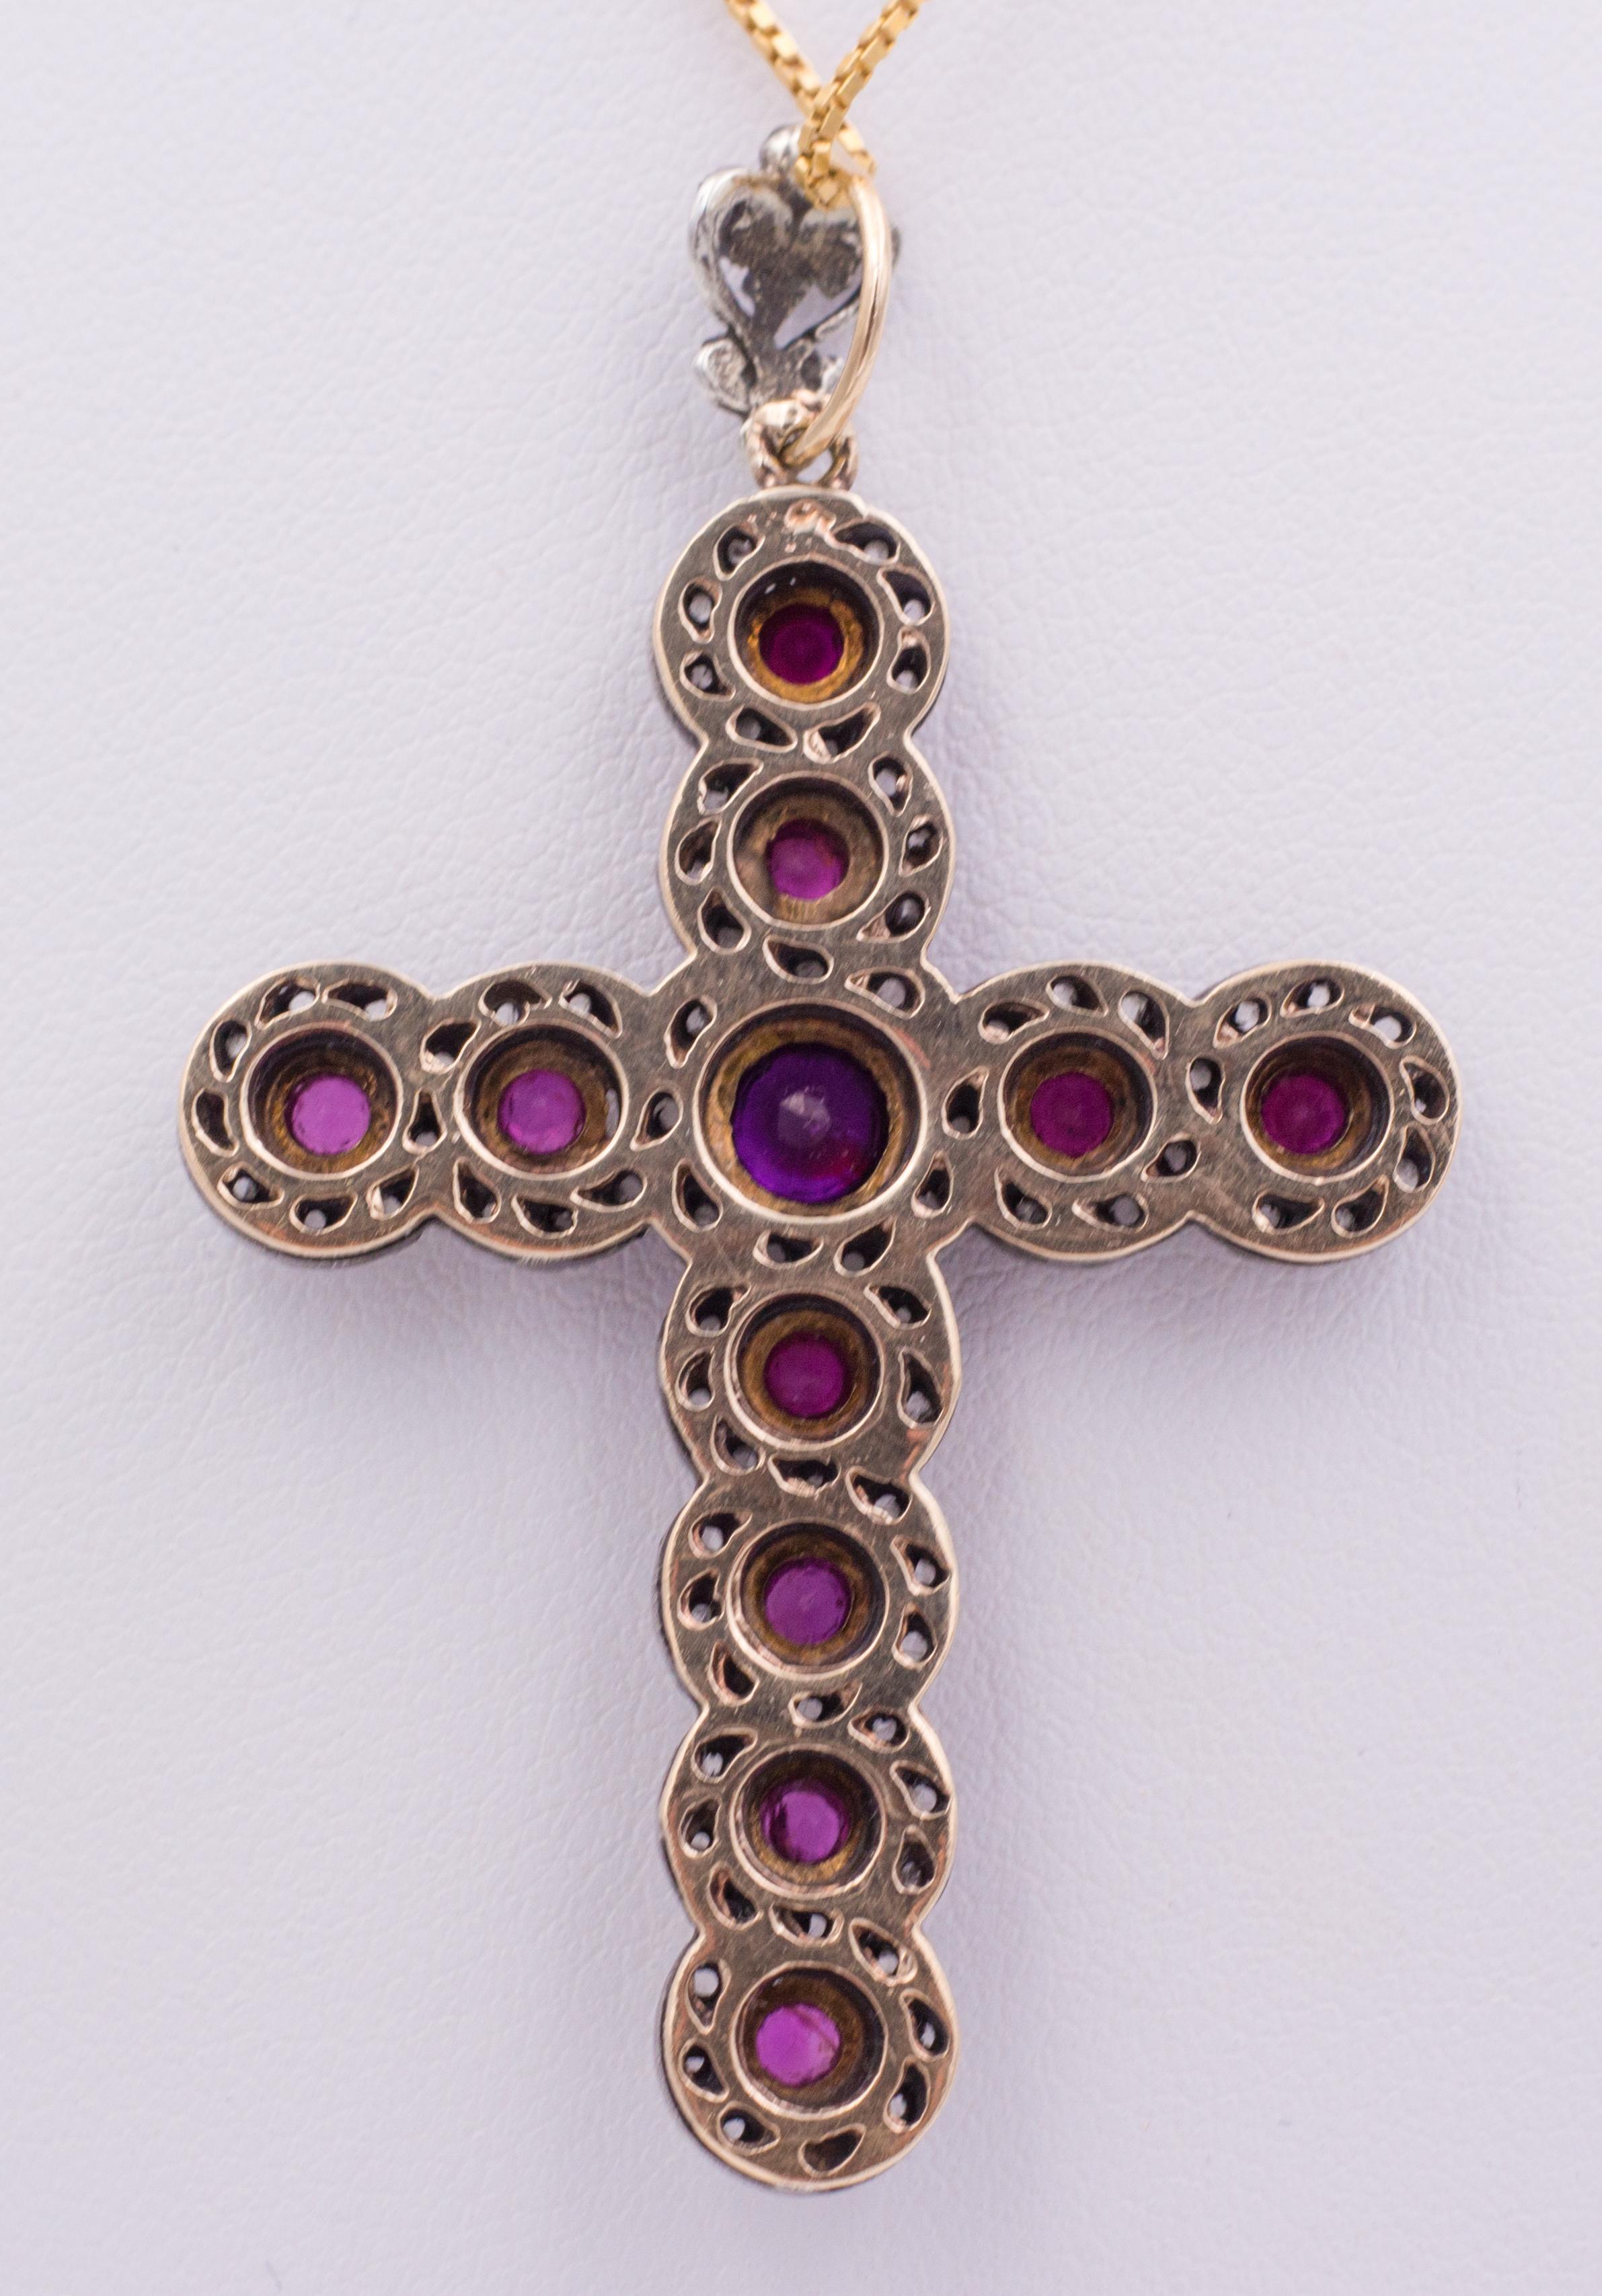 An antique gold crucifix pendant, dating from the early 20th Century: it has a very interesting undulating shape, and it is set with rubies and rose cut diamonds; the pendant is crafted in gold and silver throughout. 
The gold chain is not included